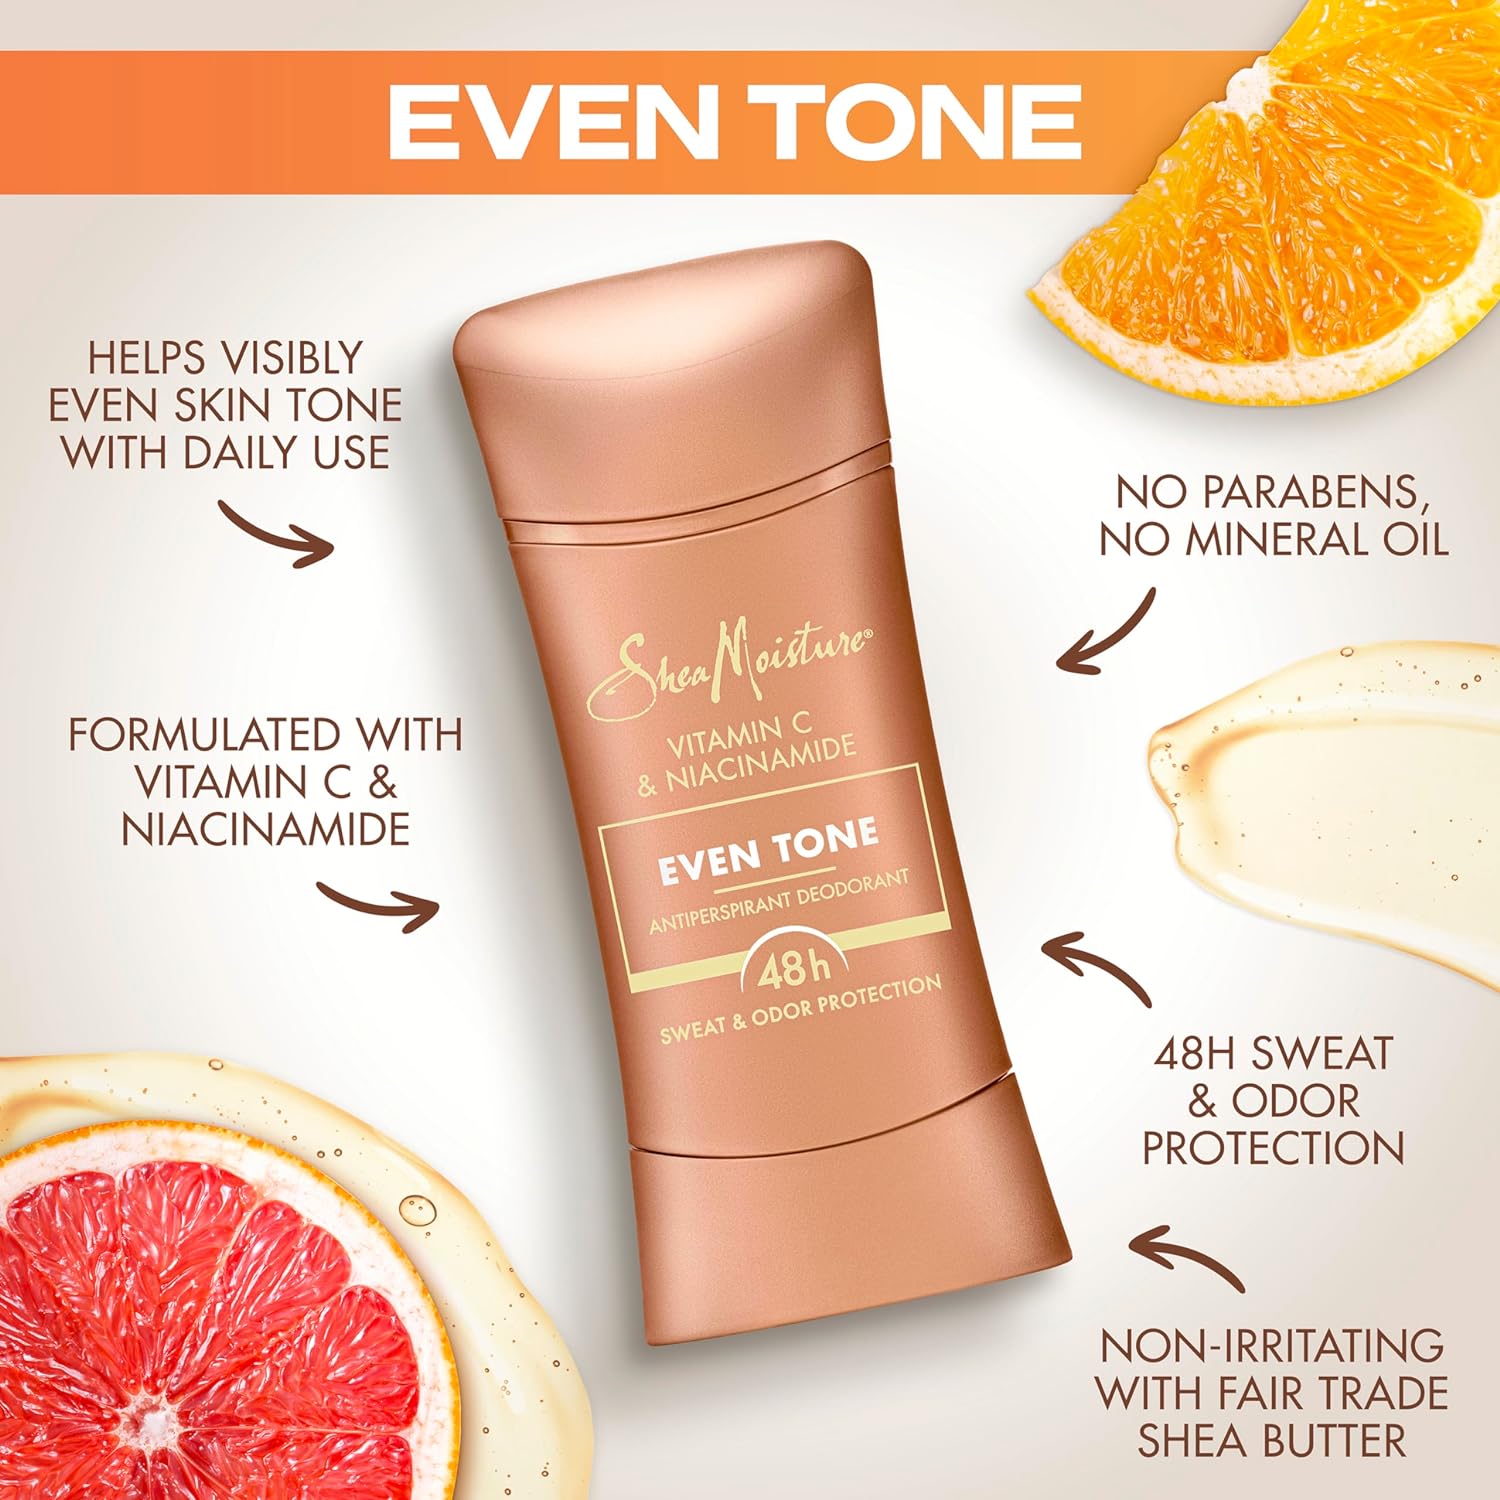 SheaMoisture Antiperspirant Deodorant Stick Even Tone Vitamin C & Niacinamide 2 Count for 48HR Sweat & Odor Protection with No Parabens & No Mineral Oil 2.6 oz : Beauty & Personal Care